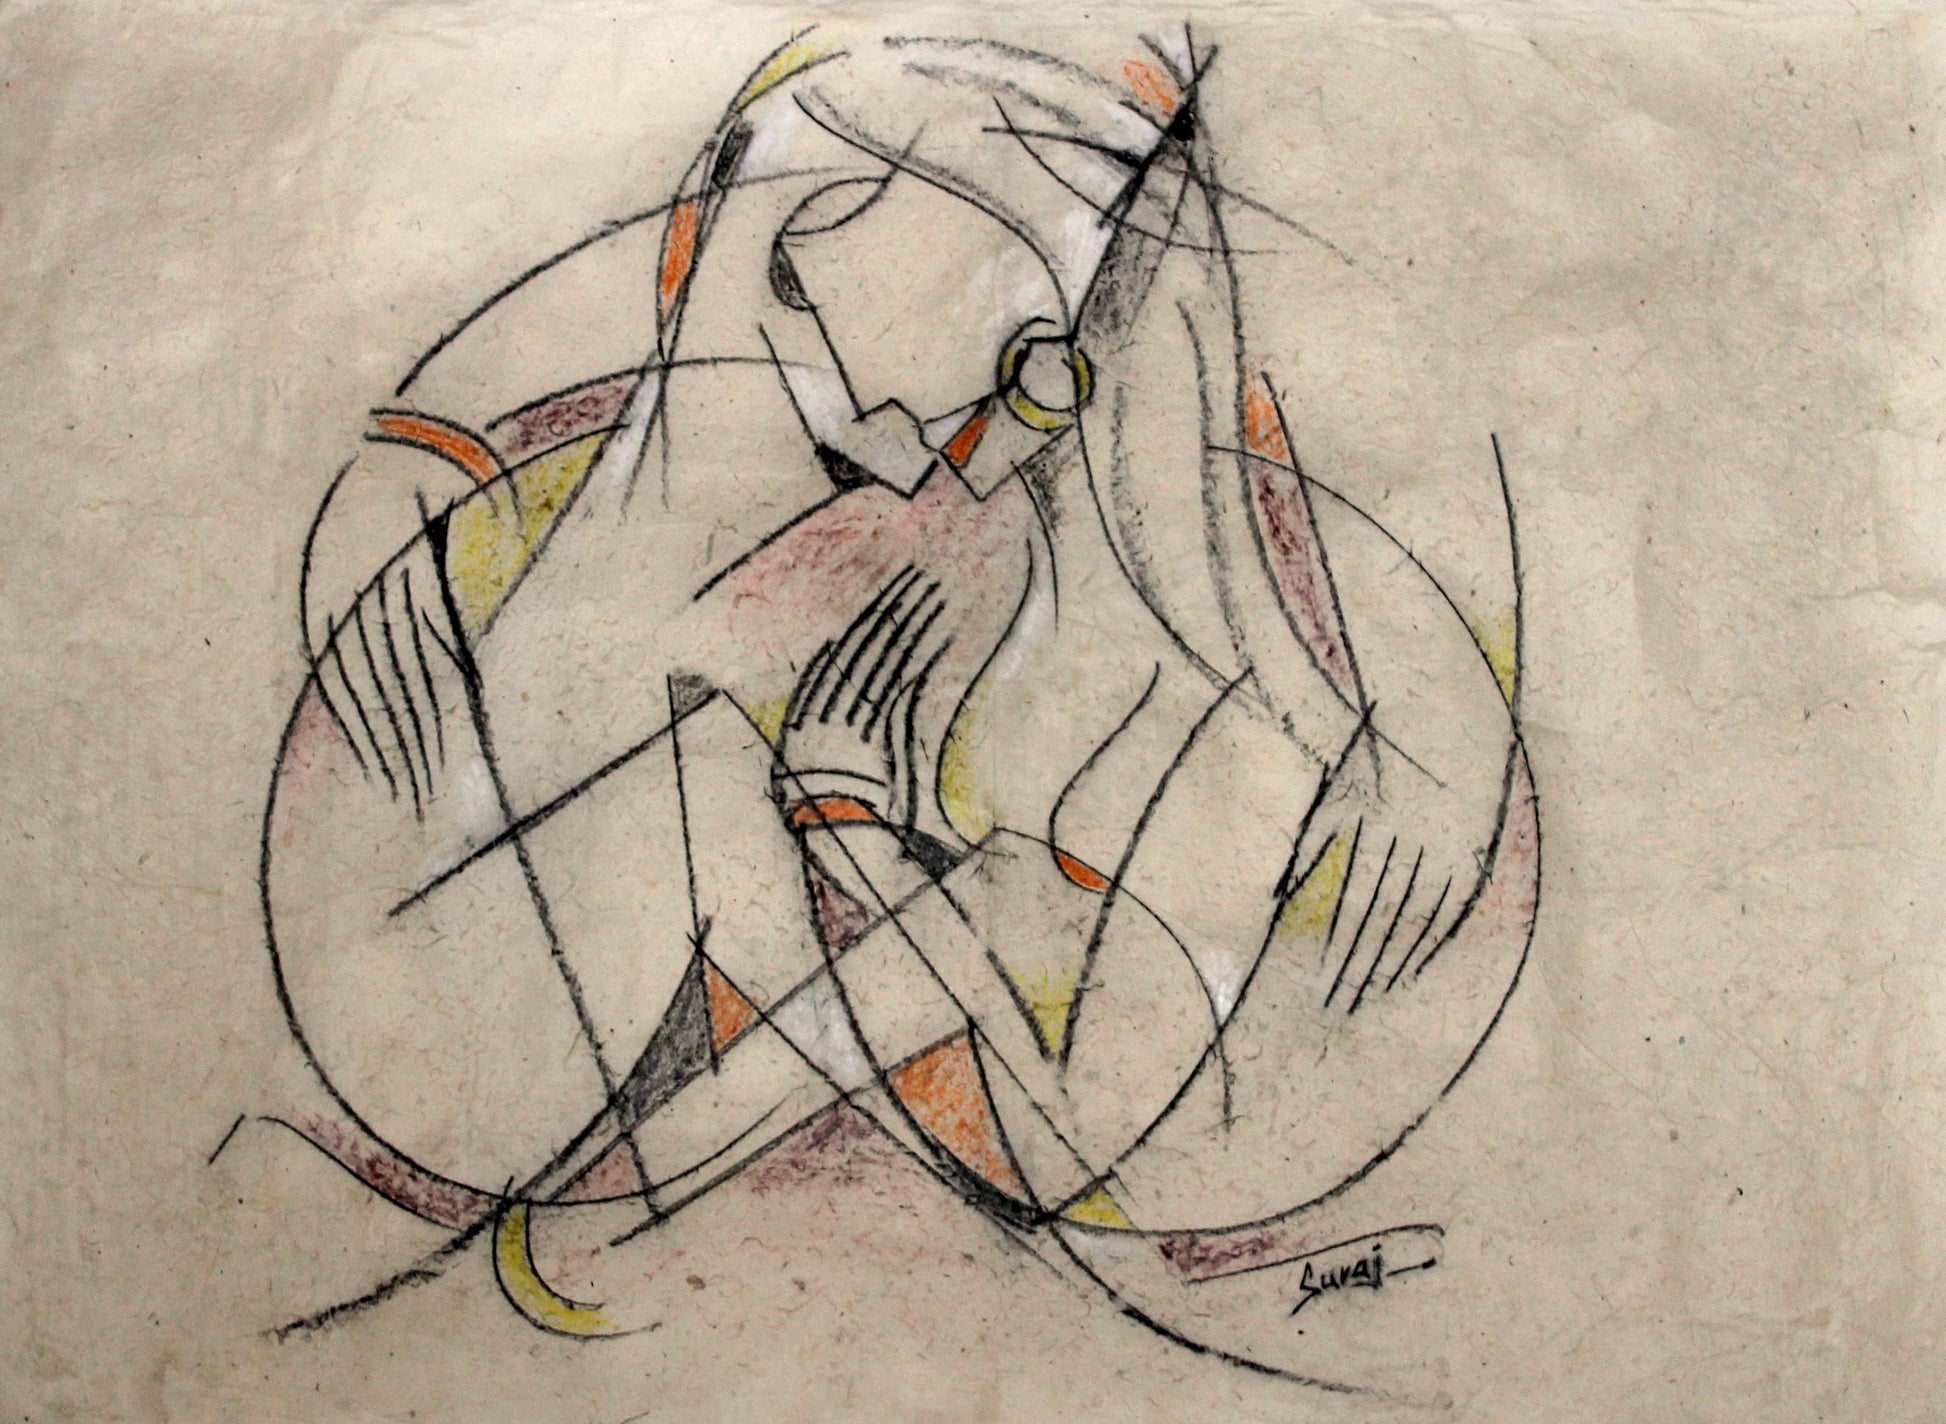 A charcoal and soft pastel sketch art expressing love and life - made on rice paper. (Lokta paper)